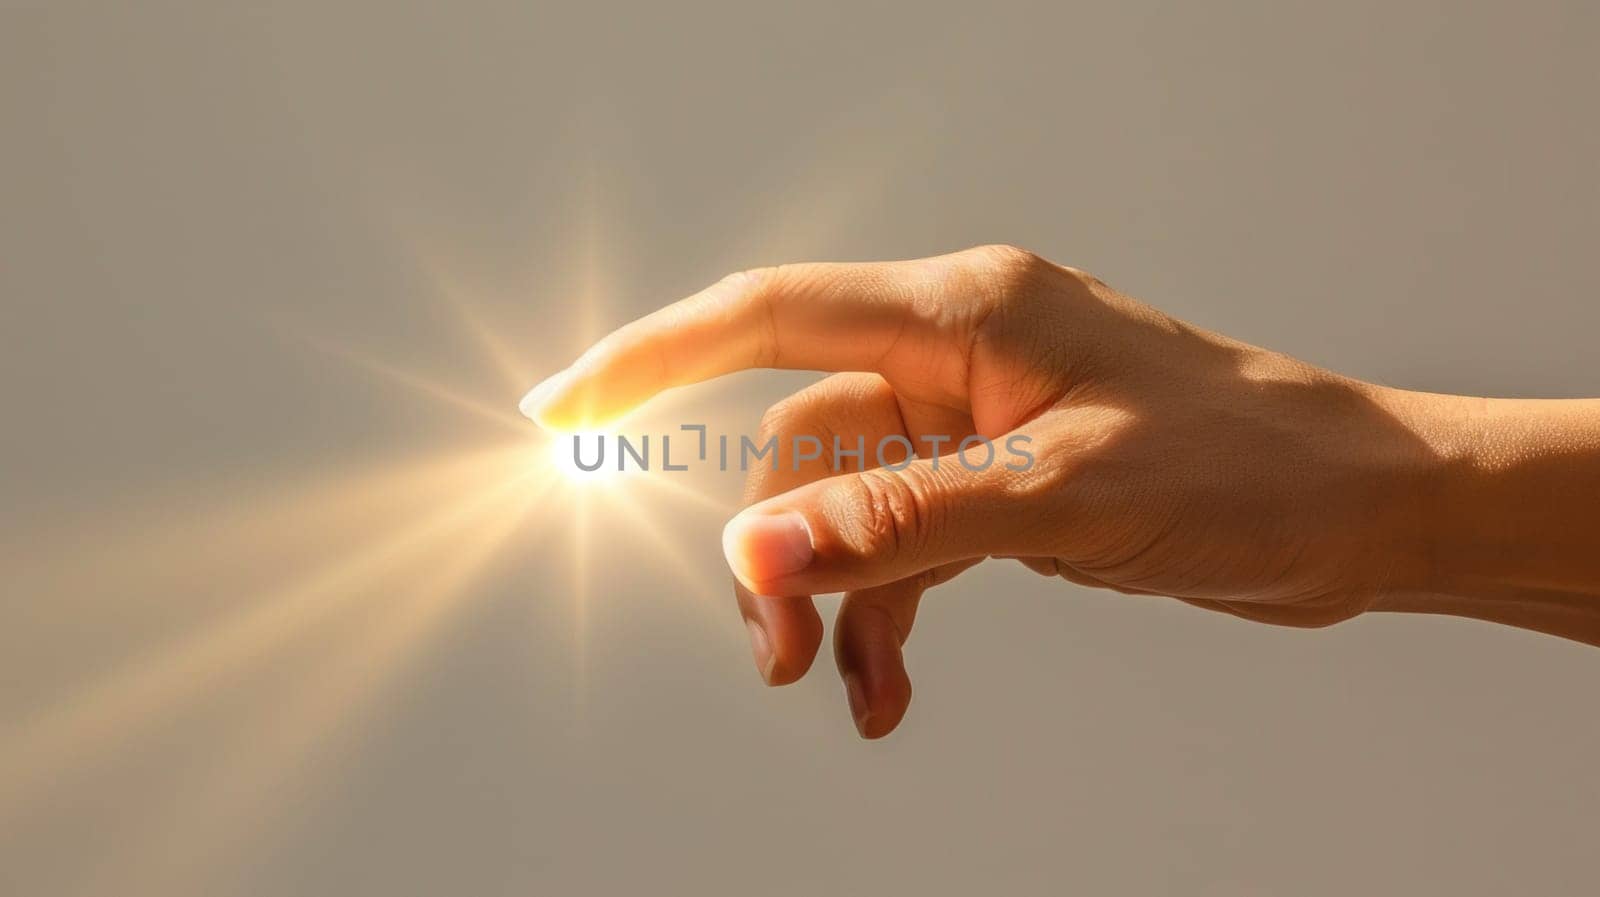 A hand reaching out to touch a bright light source, AI by starush